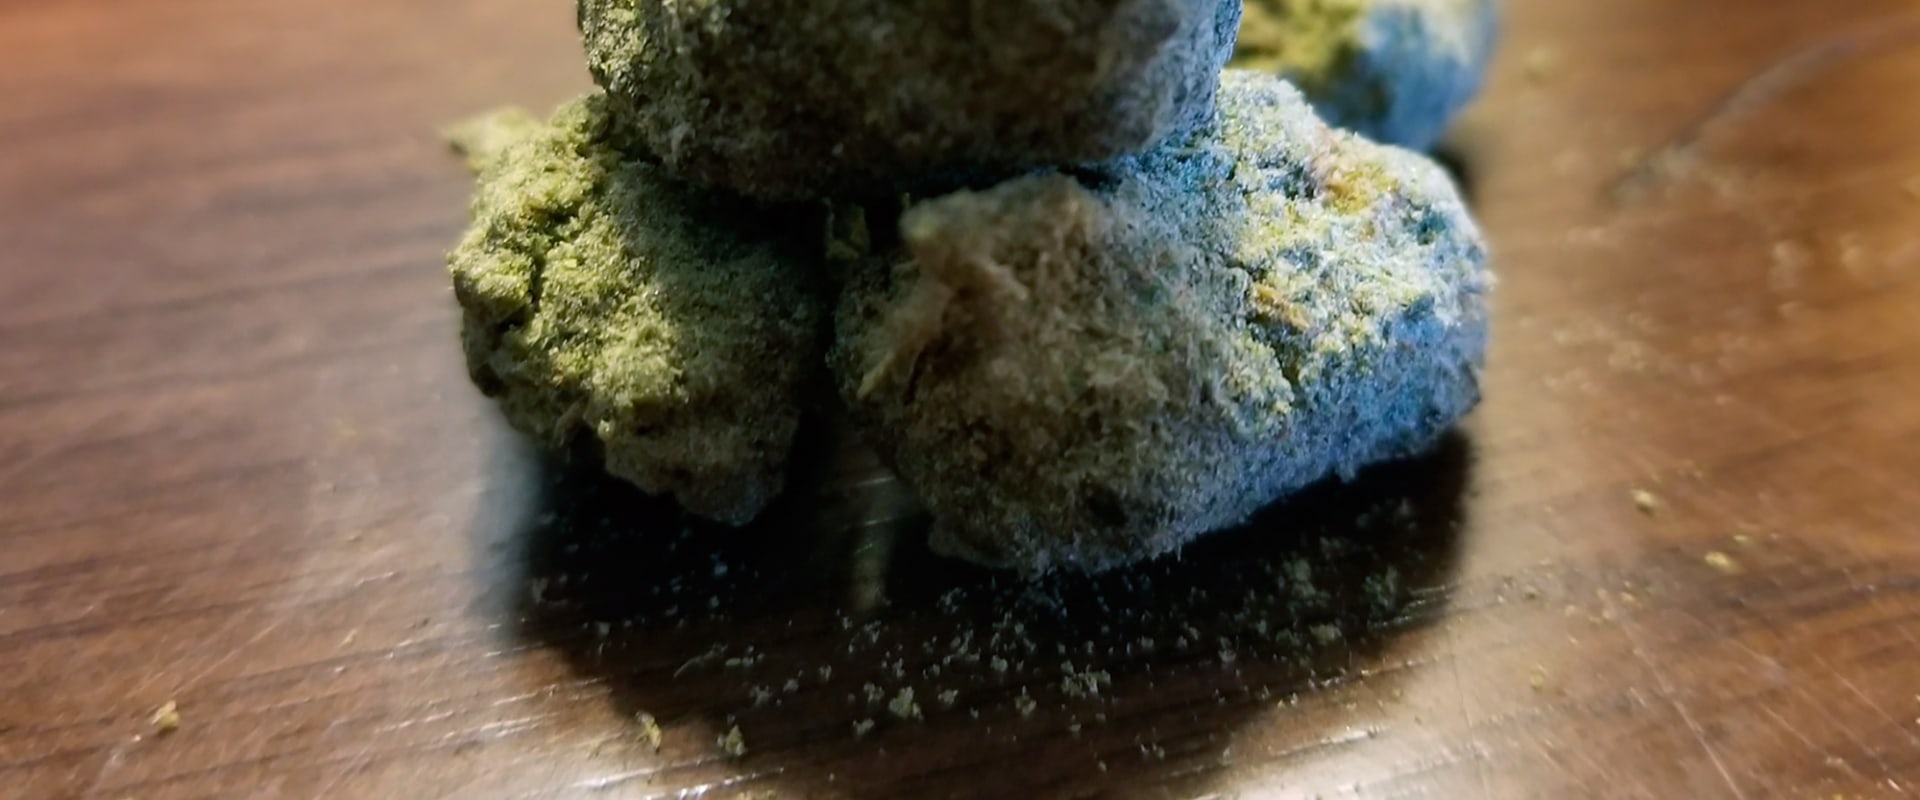 Is it safe to combine different types of delta-8 thc products such as moon rocks in one session?